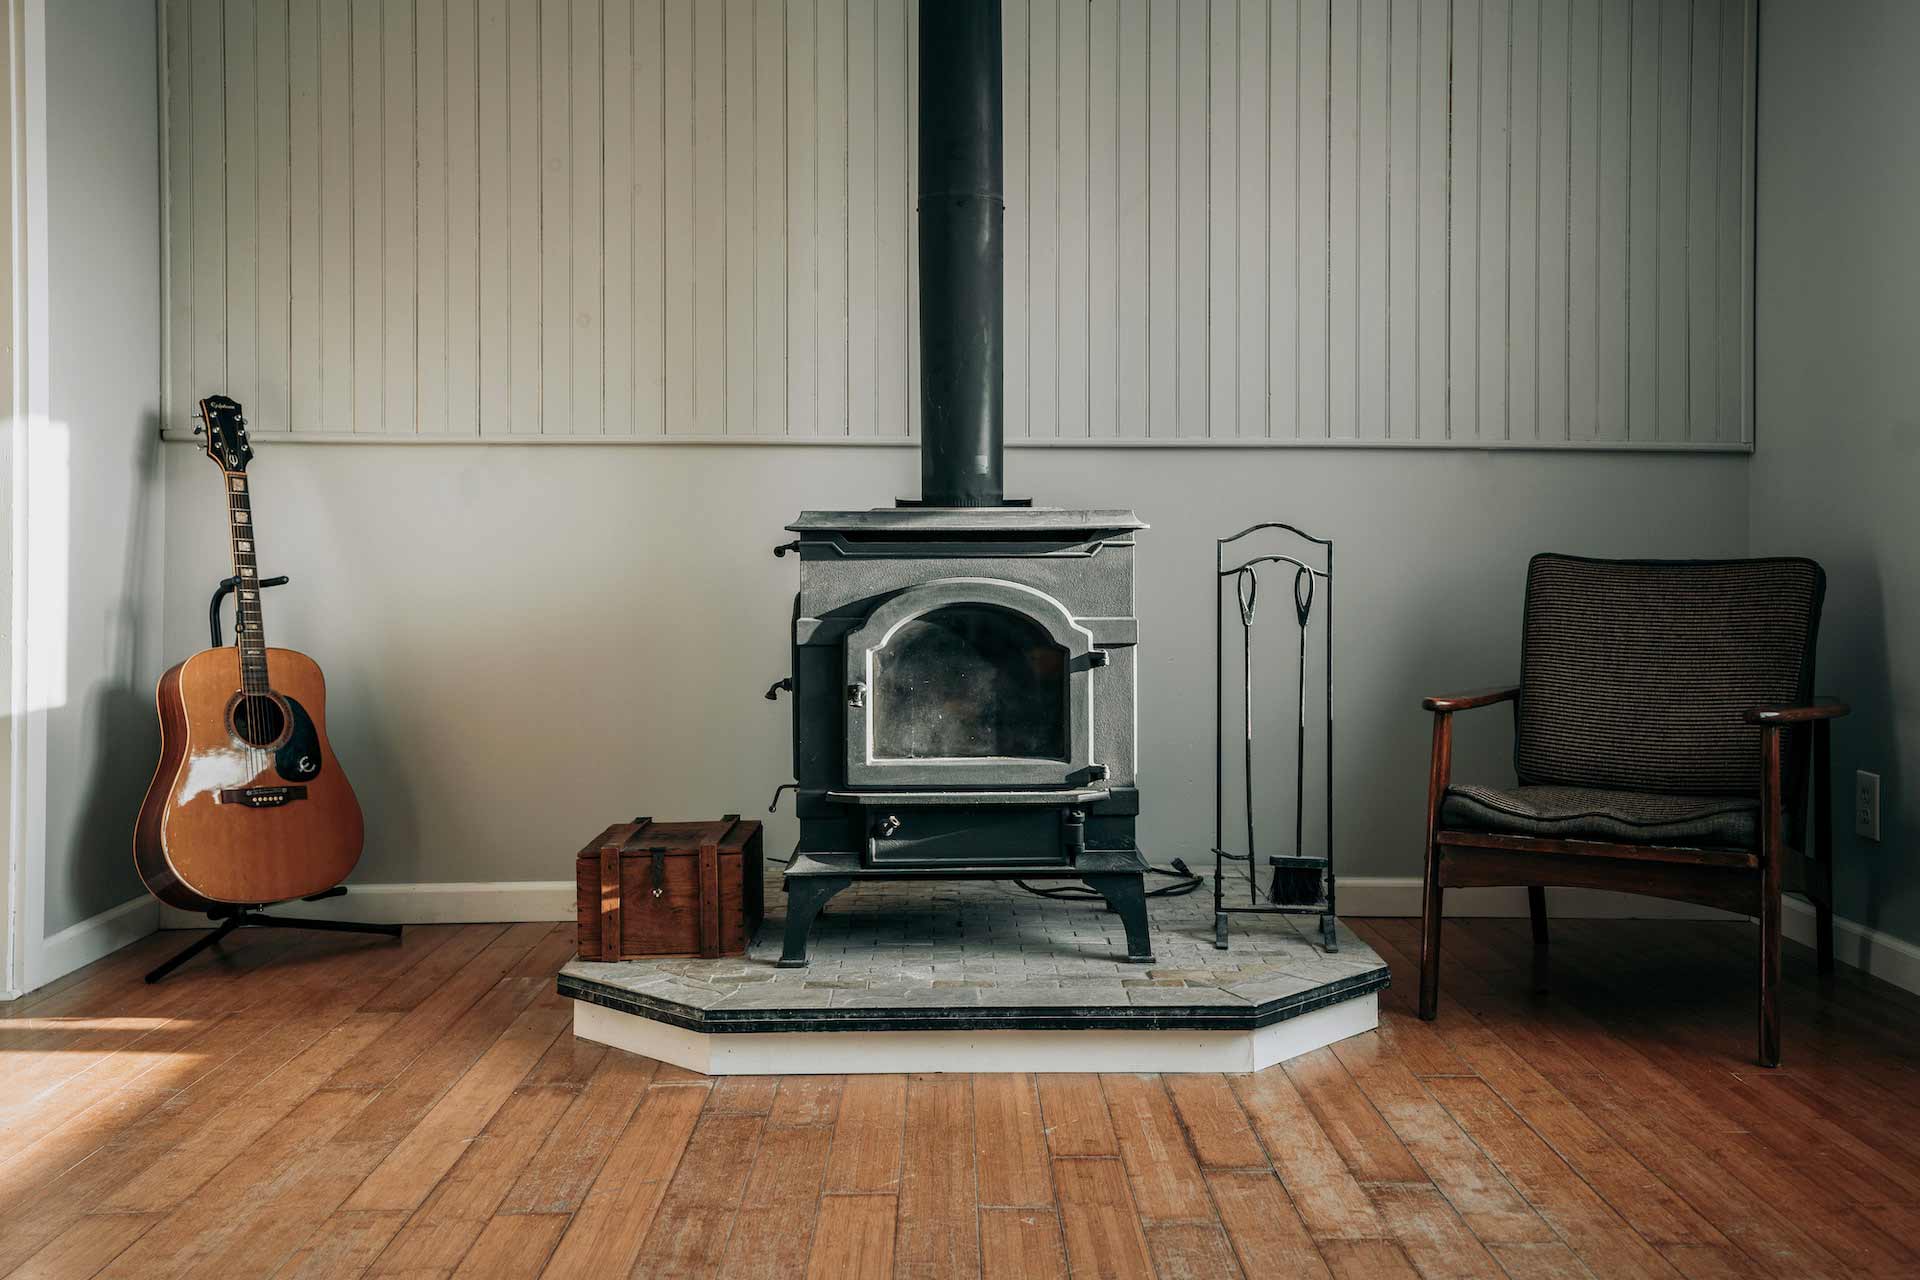 A room with a wood-burning stove, a guitar, and an armchair